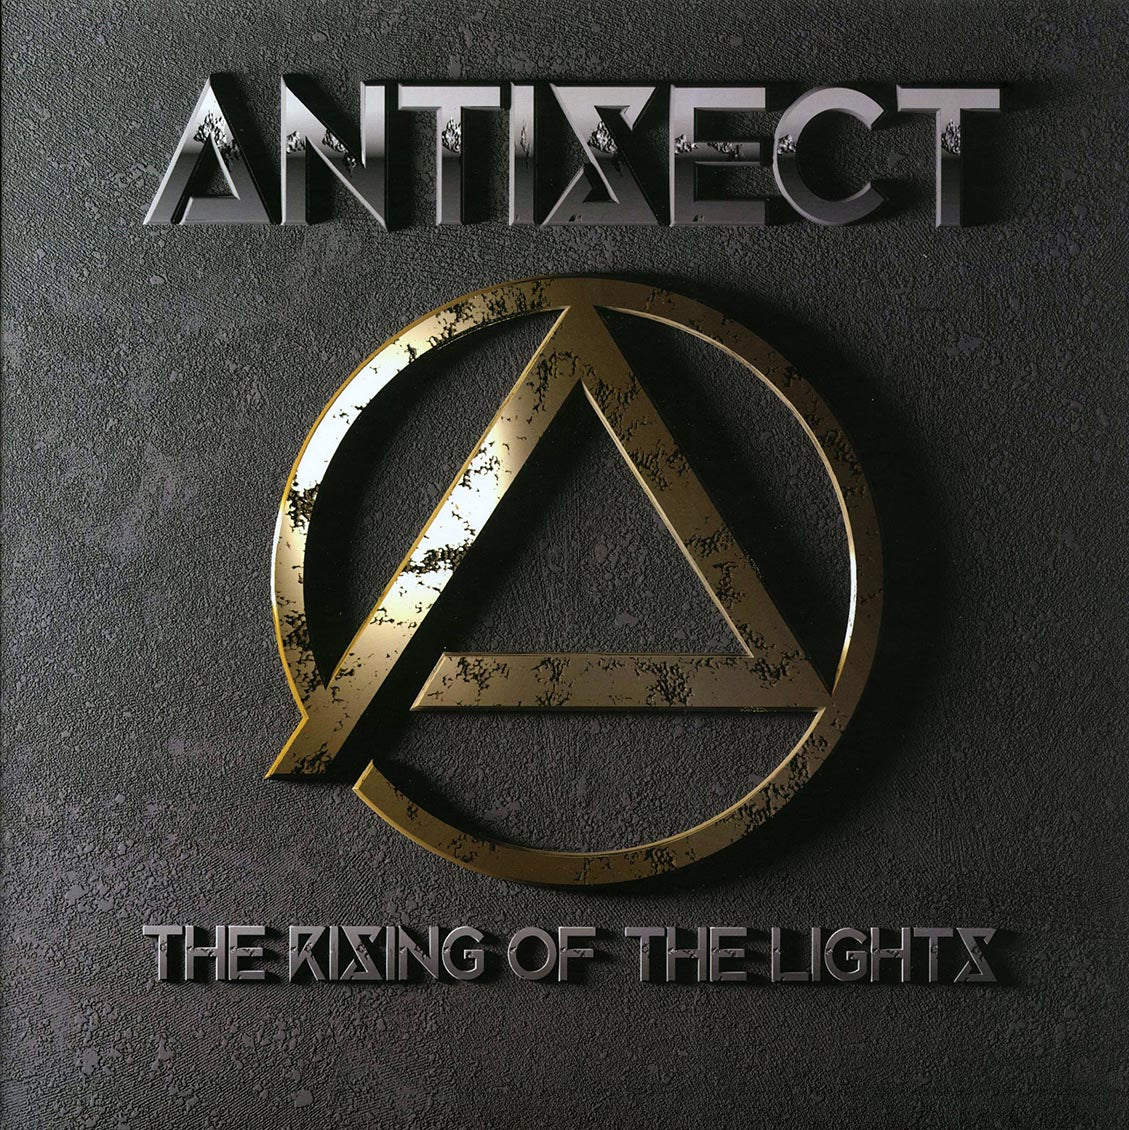 Antisect - The Rising Of The Lights - Vinyl LP